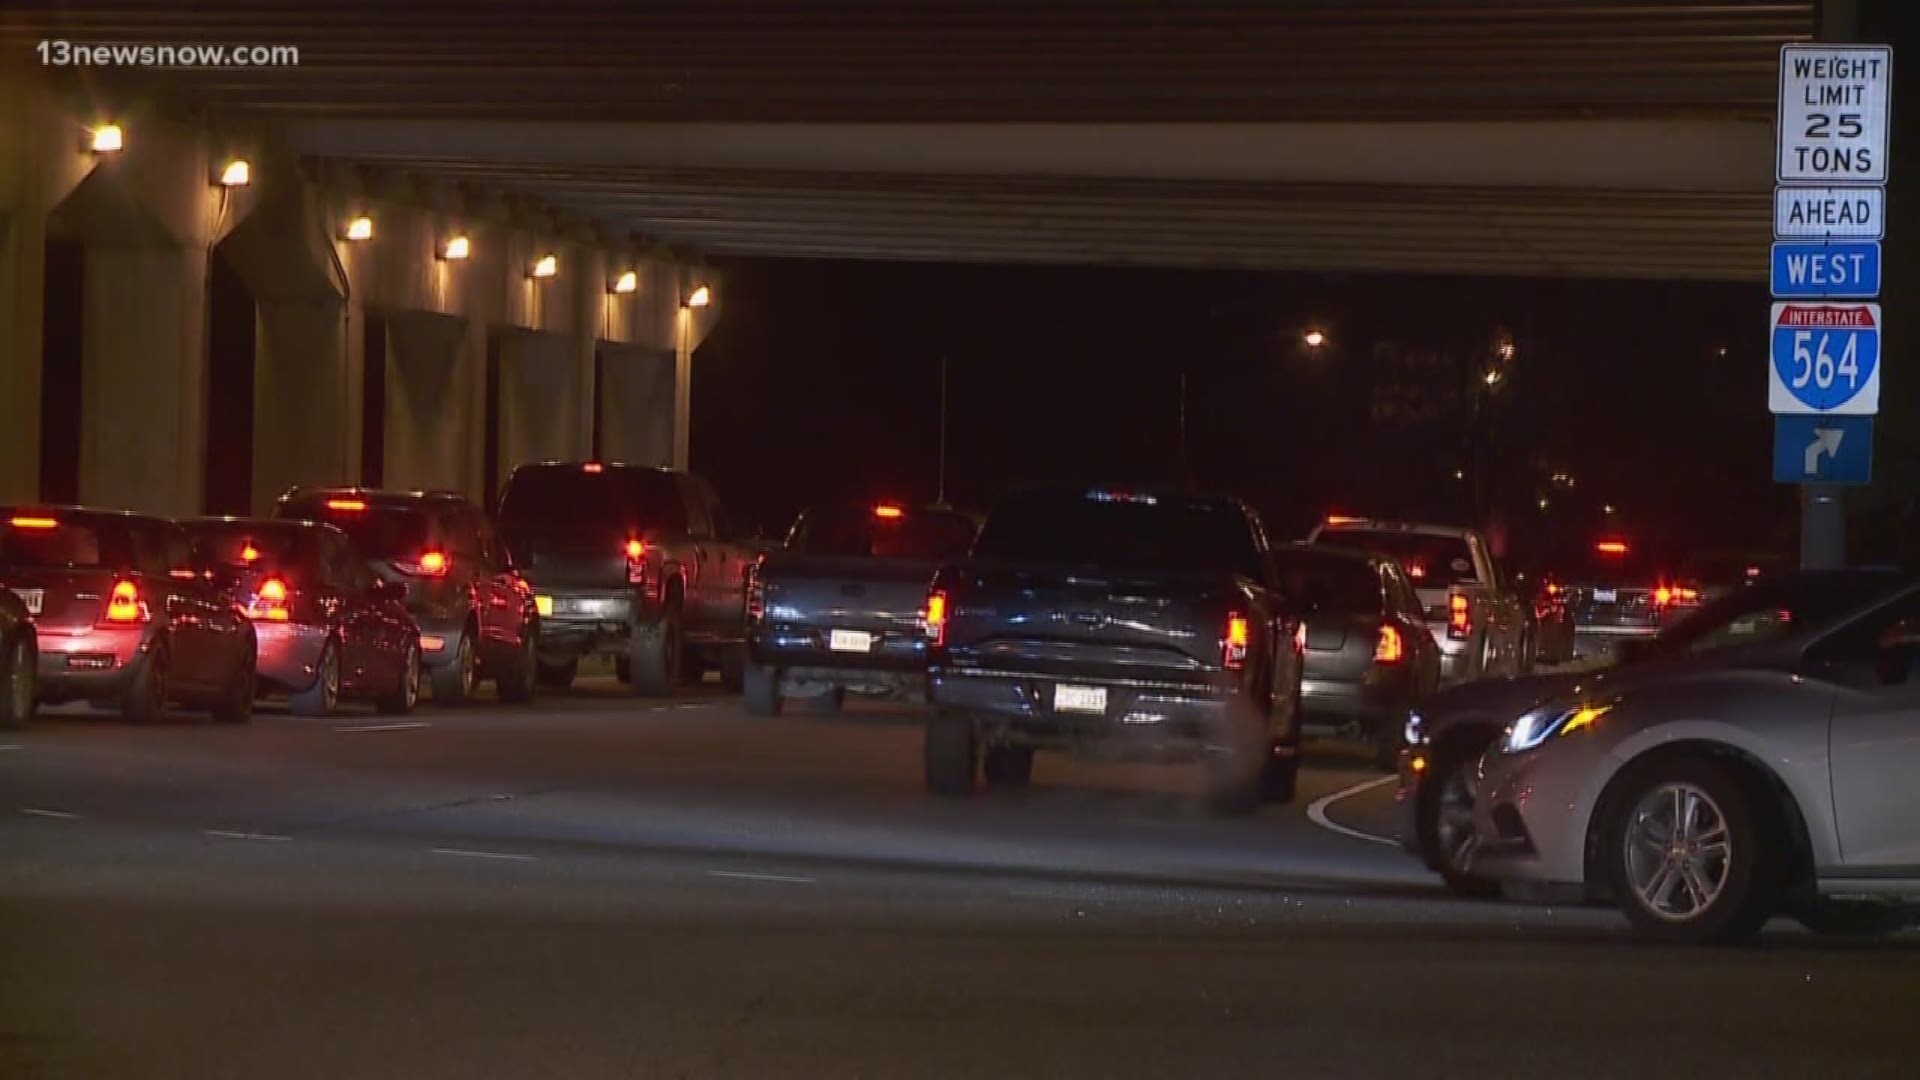 Changes in base security rules have caused big problems for drivers during rush hour traffic. 13News Now Mike Gooding sheds light on the reason for security changes.